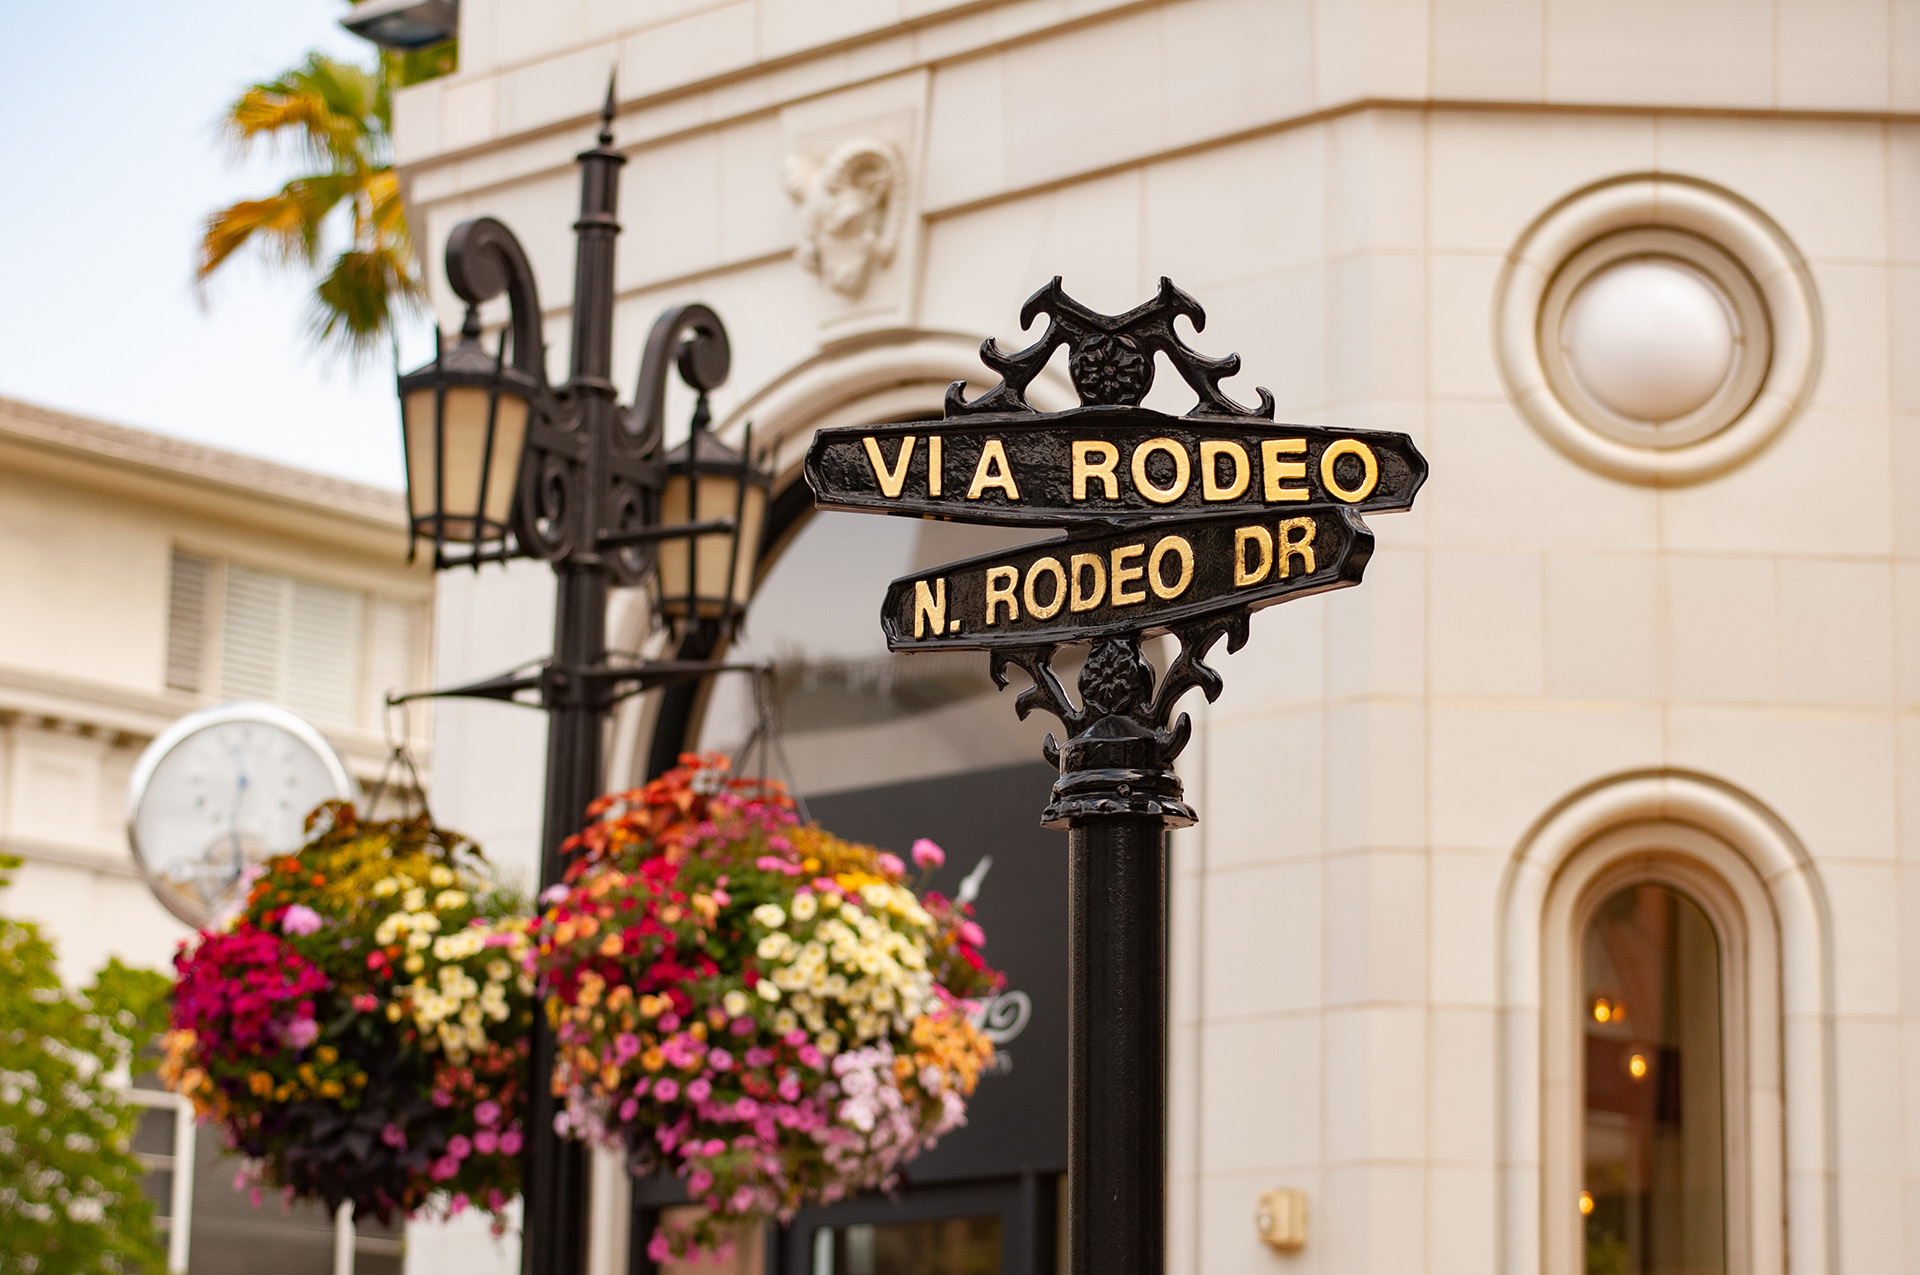 Iconic Rodeo Drive in Beverly Hills, lined with luxury boutiques and palm trees under blue skies.